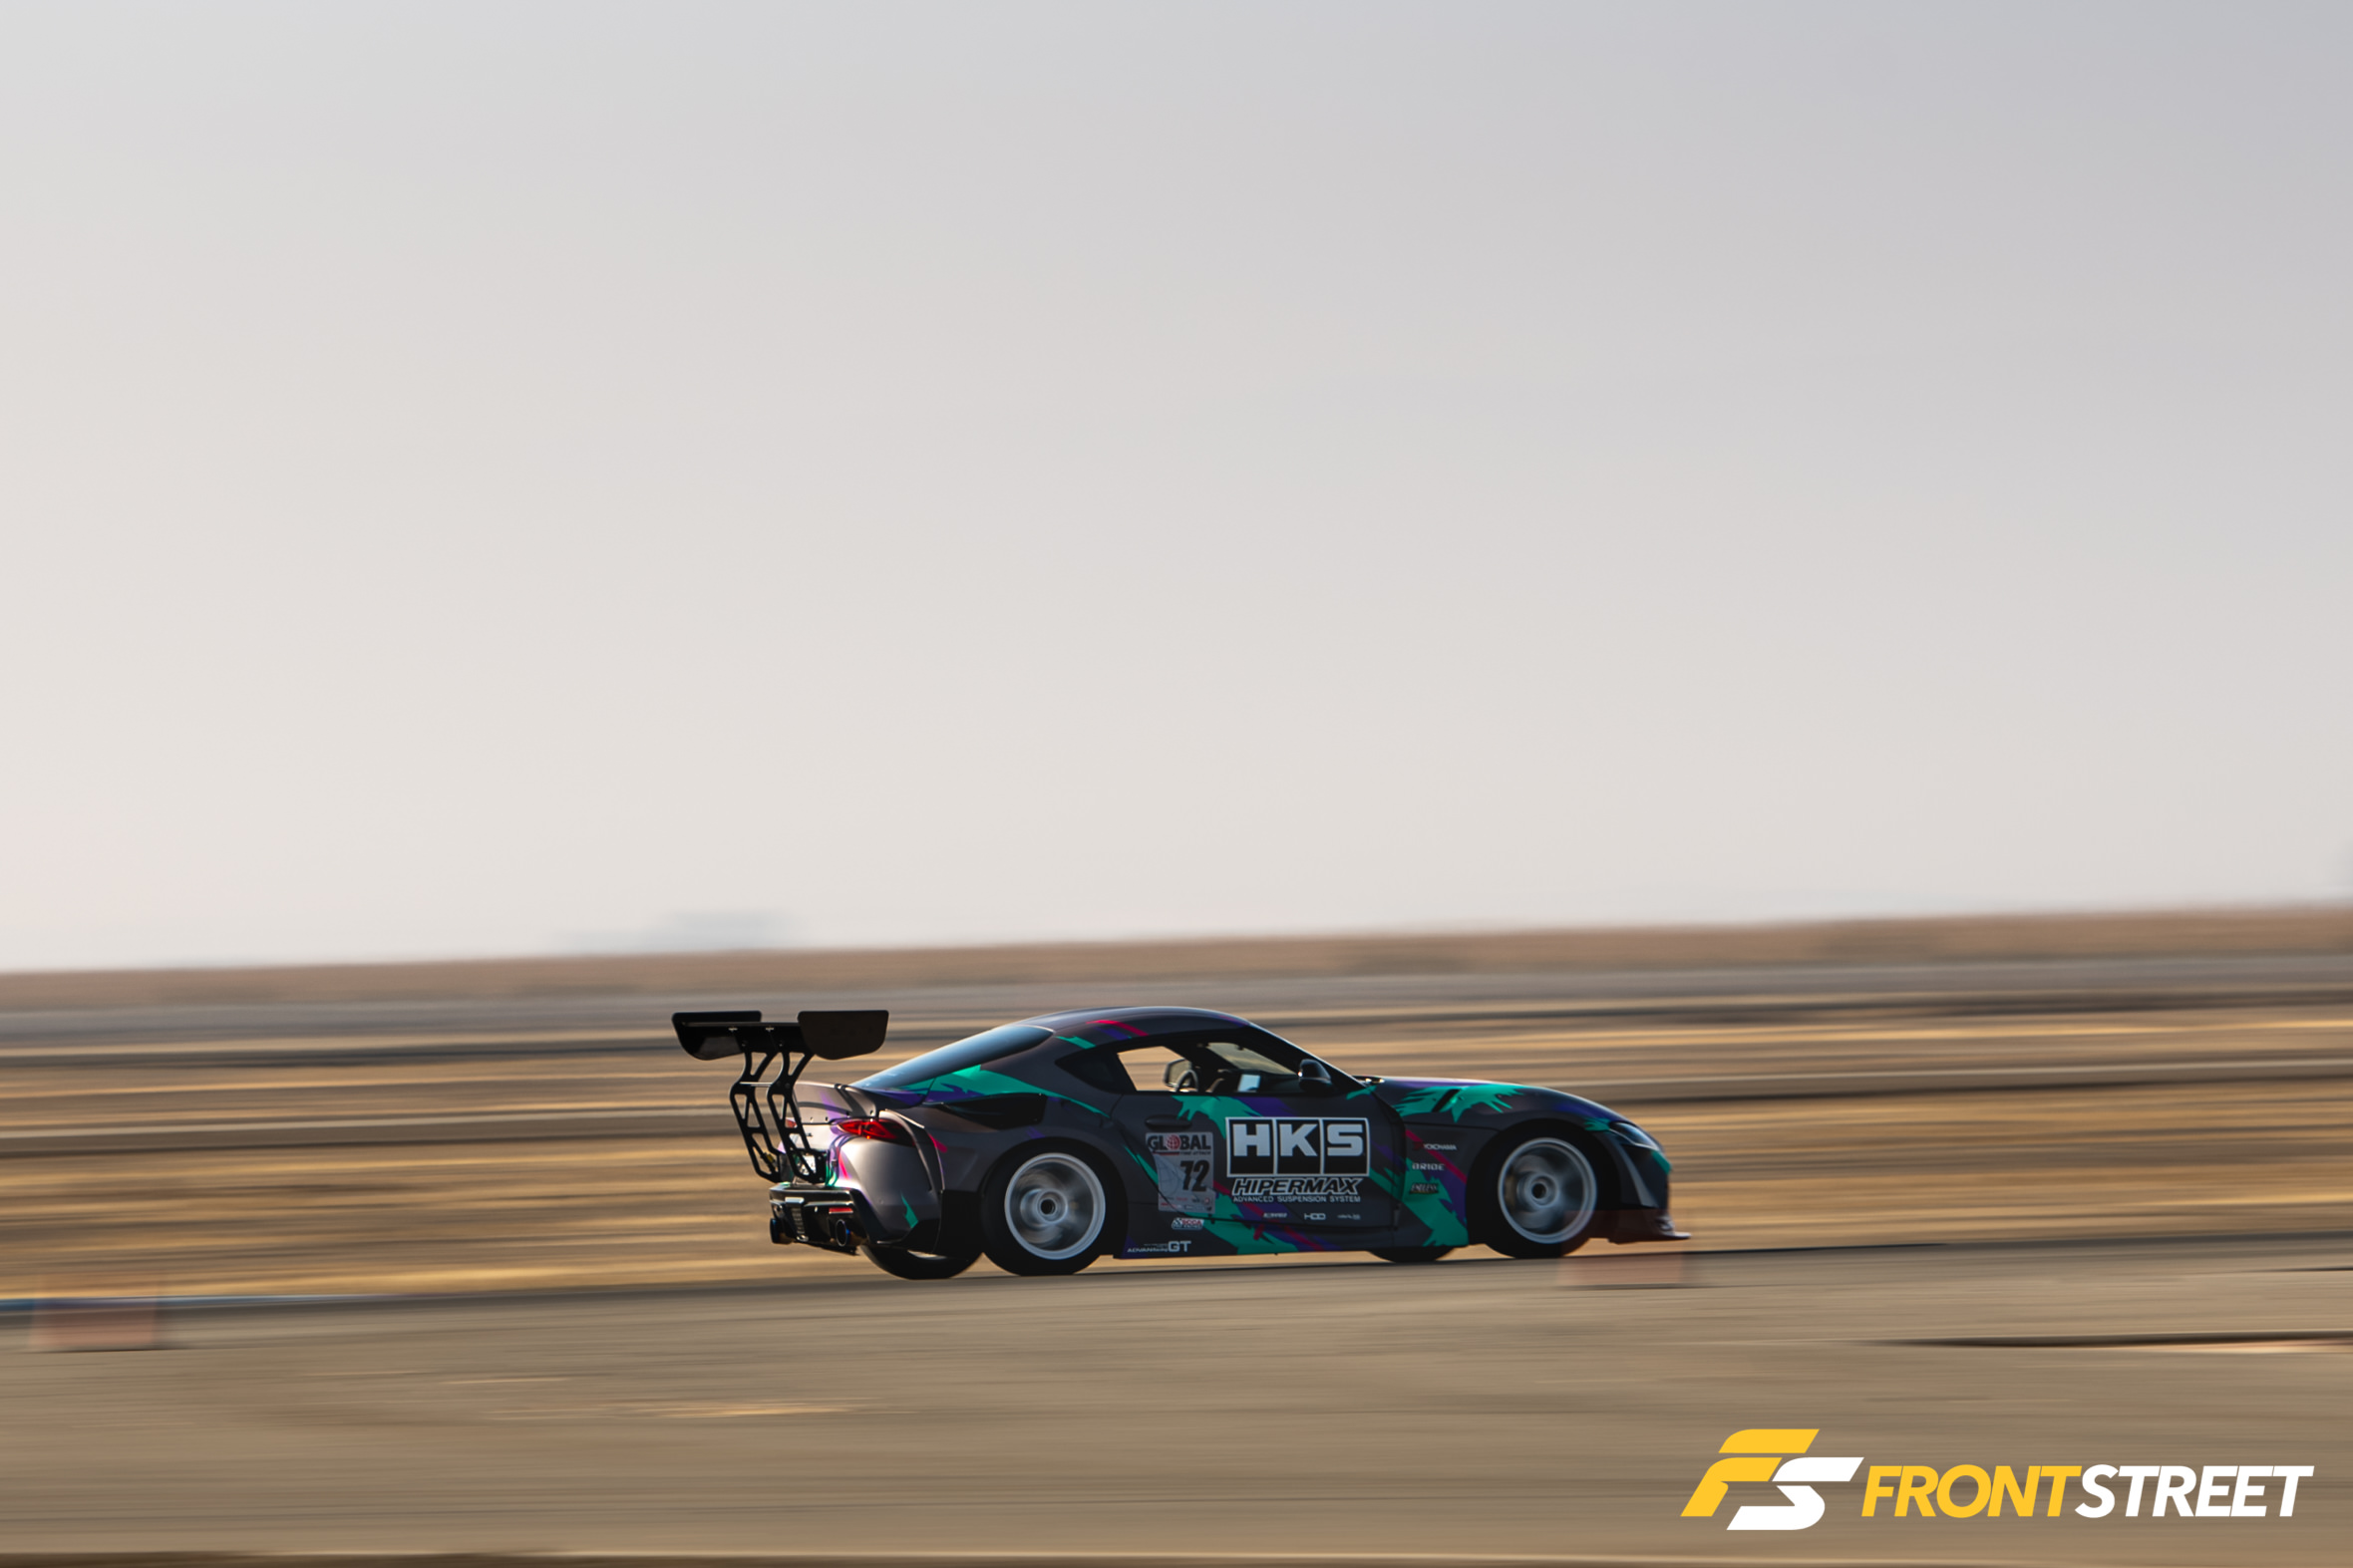 High Hopes Under A Low Autumn Sun: Global Time Attack Finals 2019